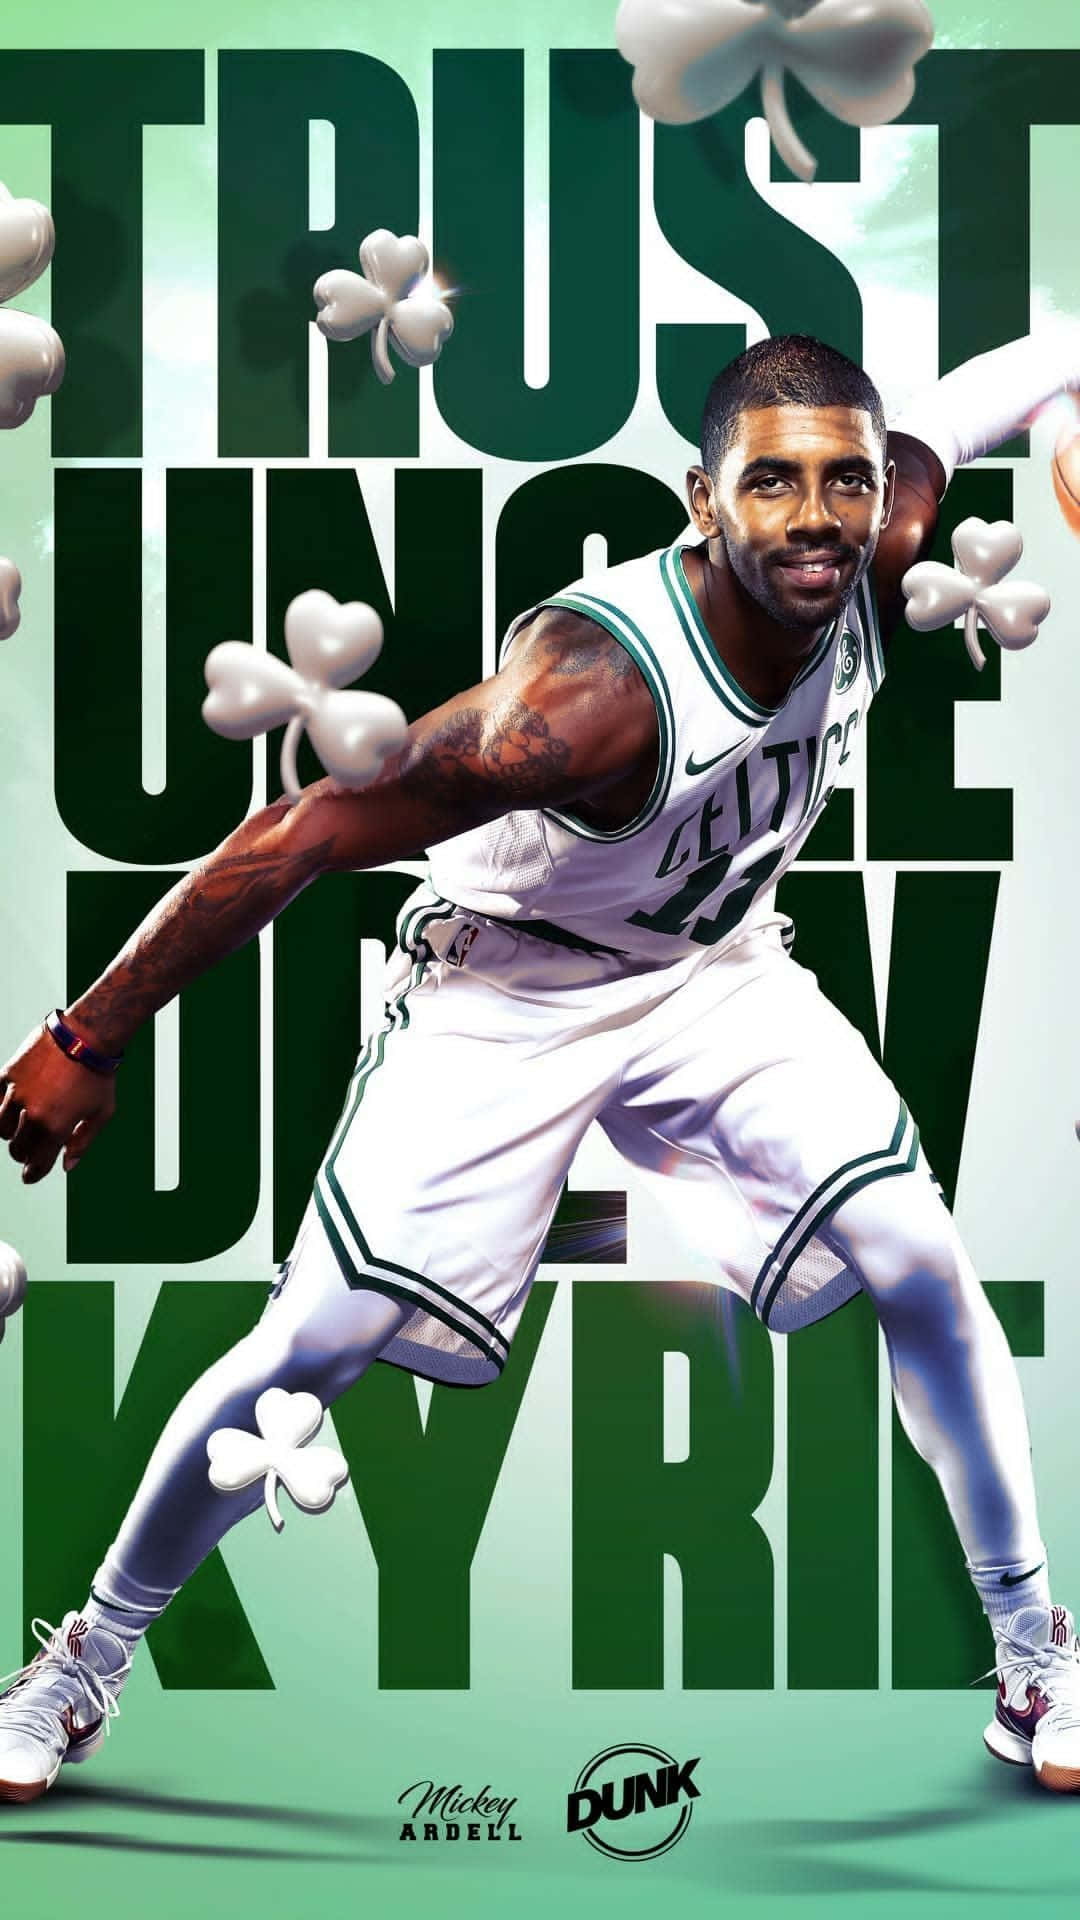 Kyrie Iphone Wallpaper